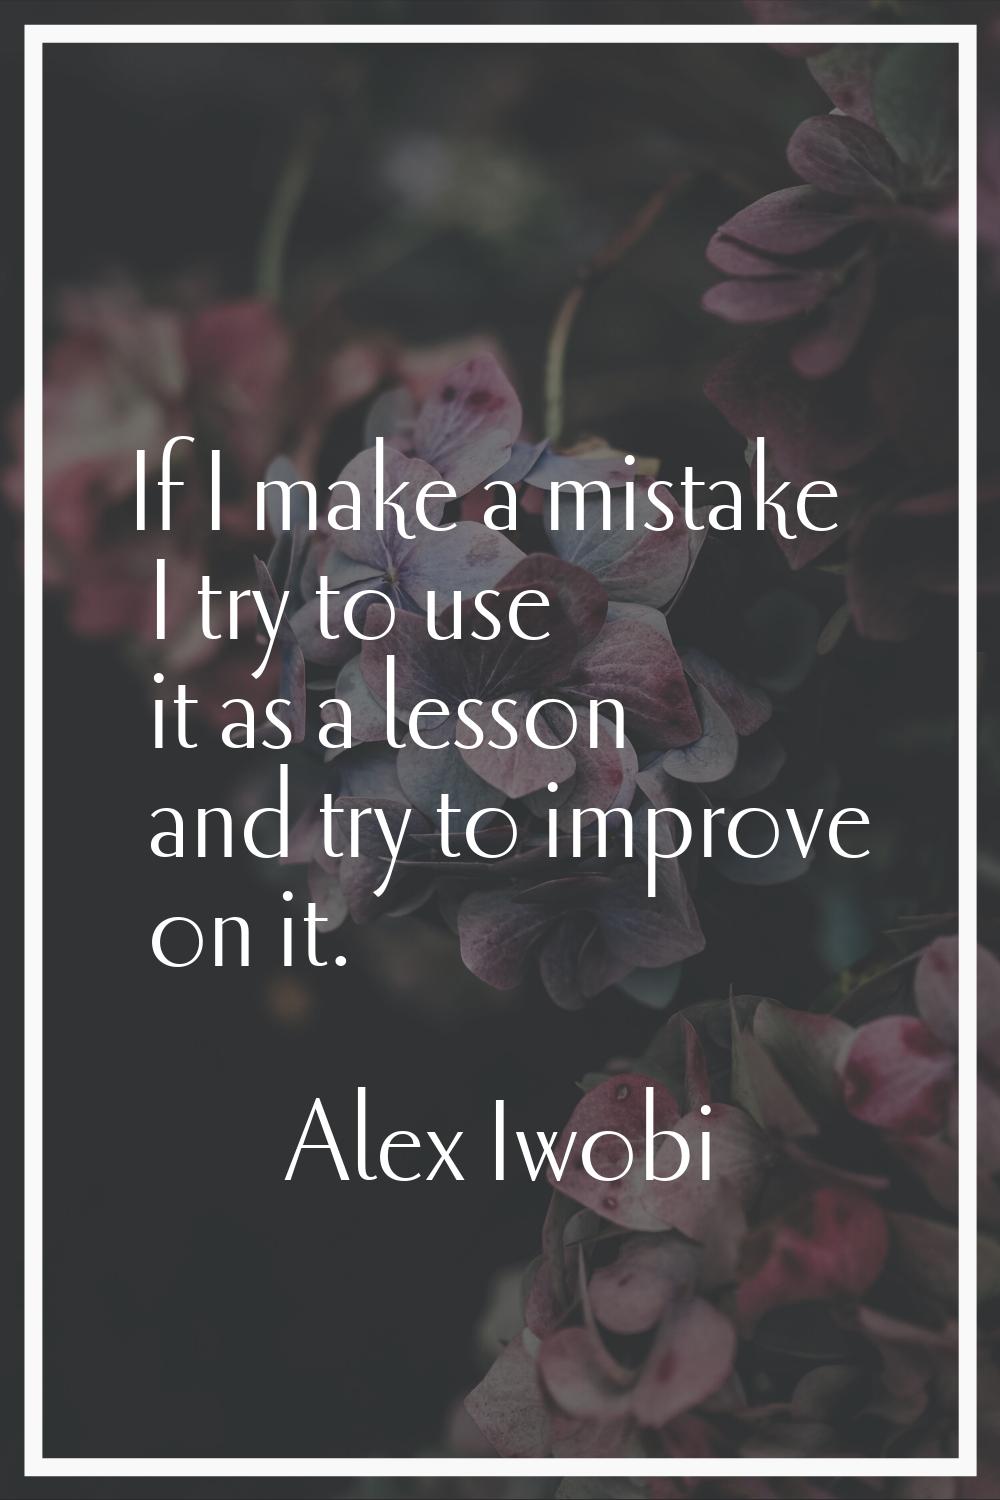 If I make a mistake I try to use it as a lesson and try to improve on it.